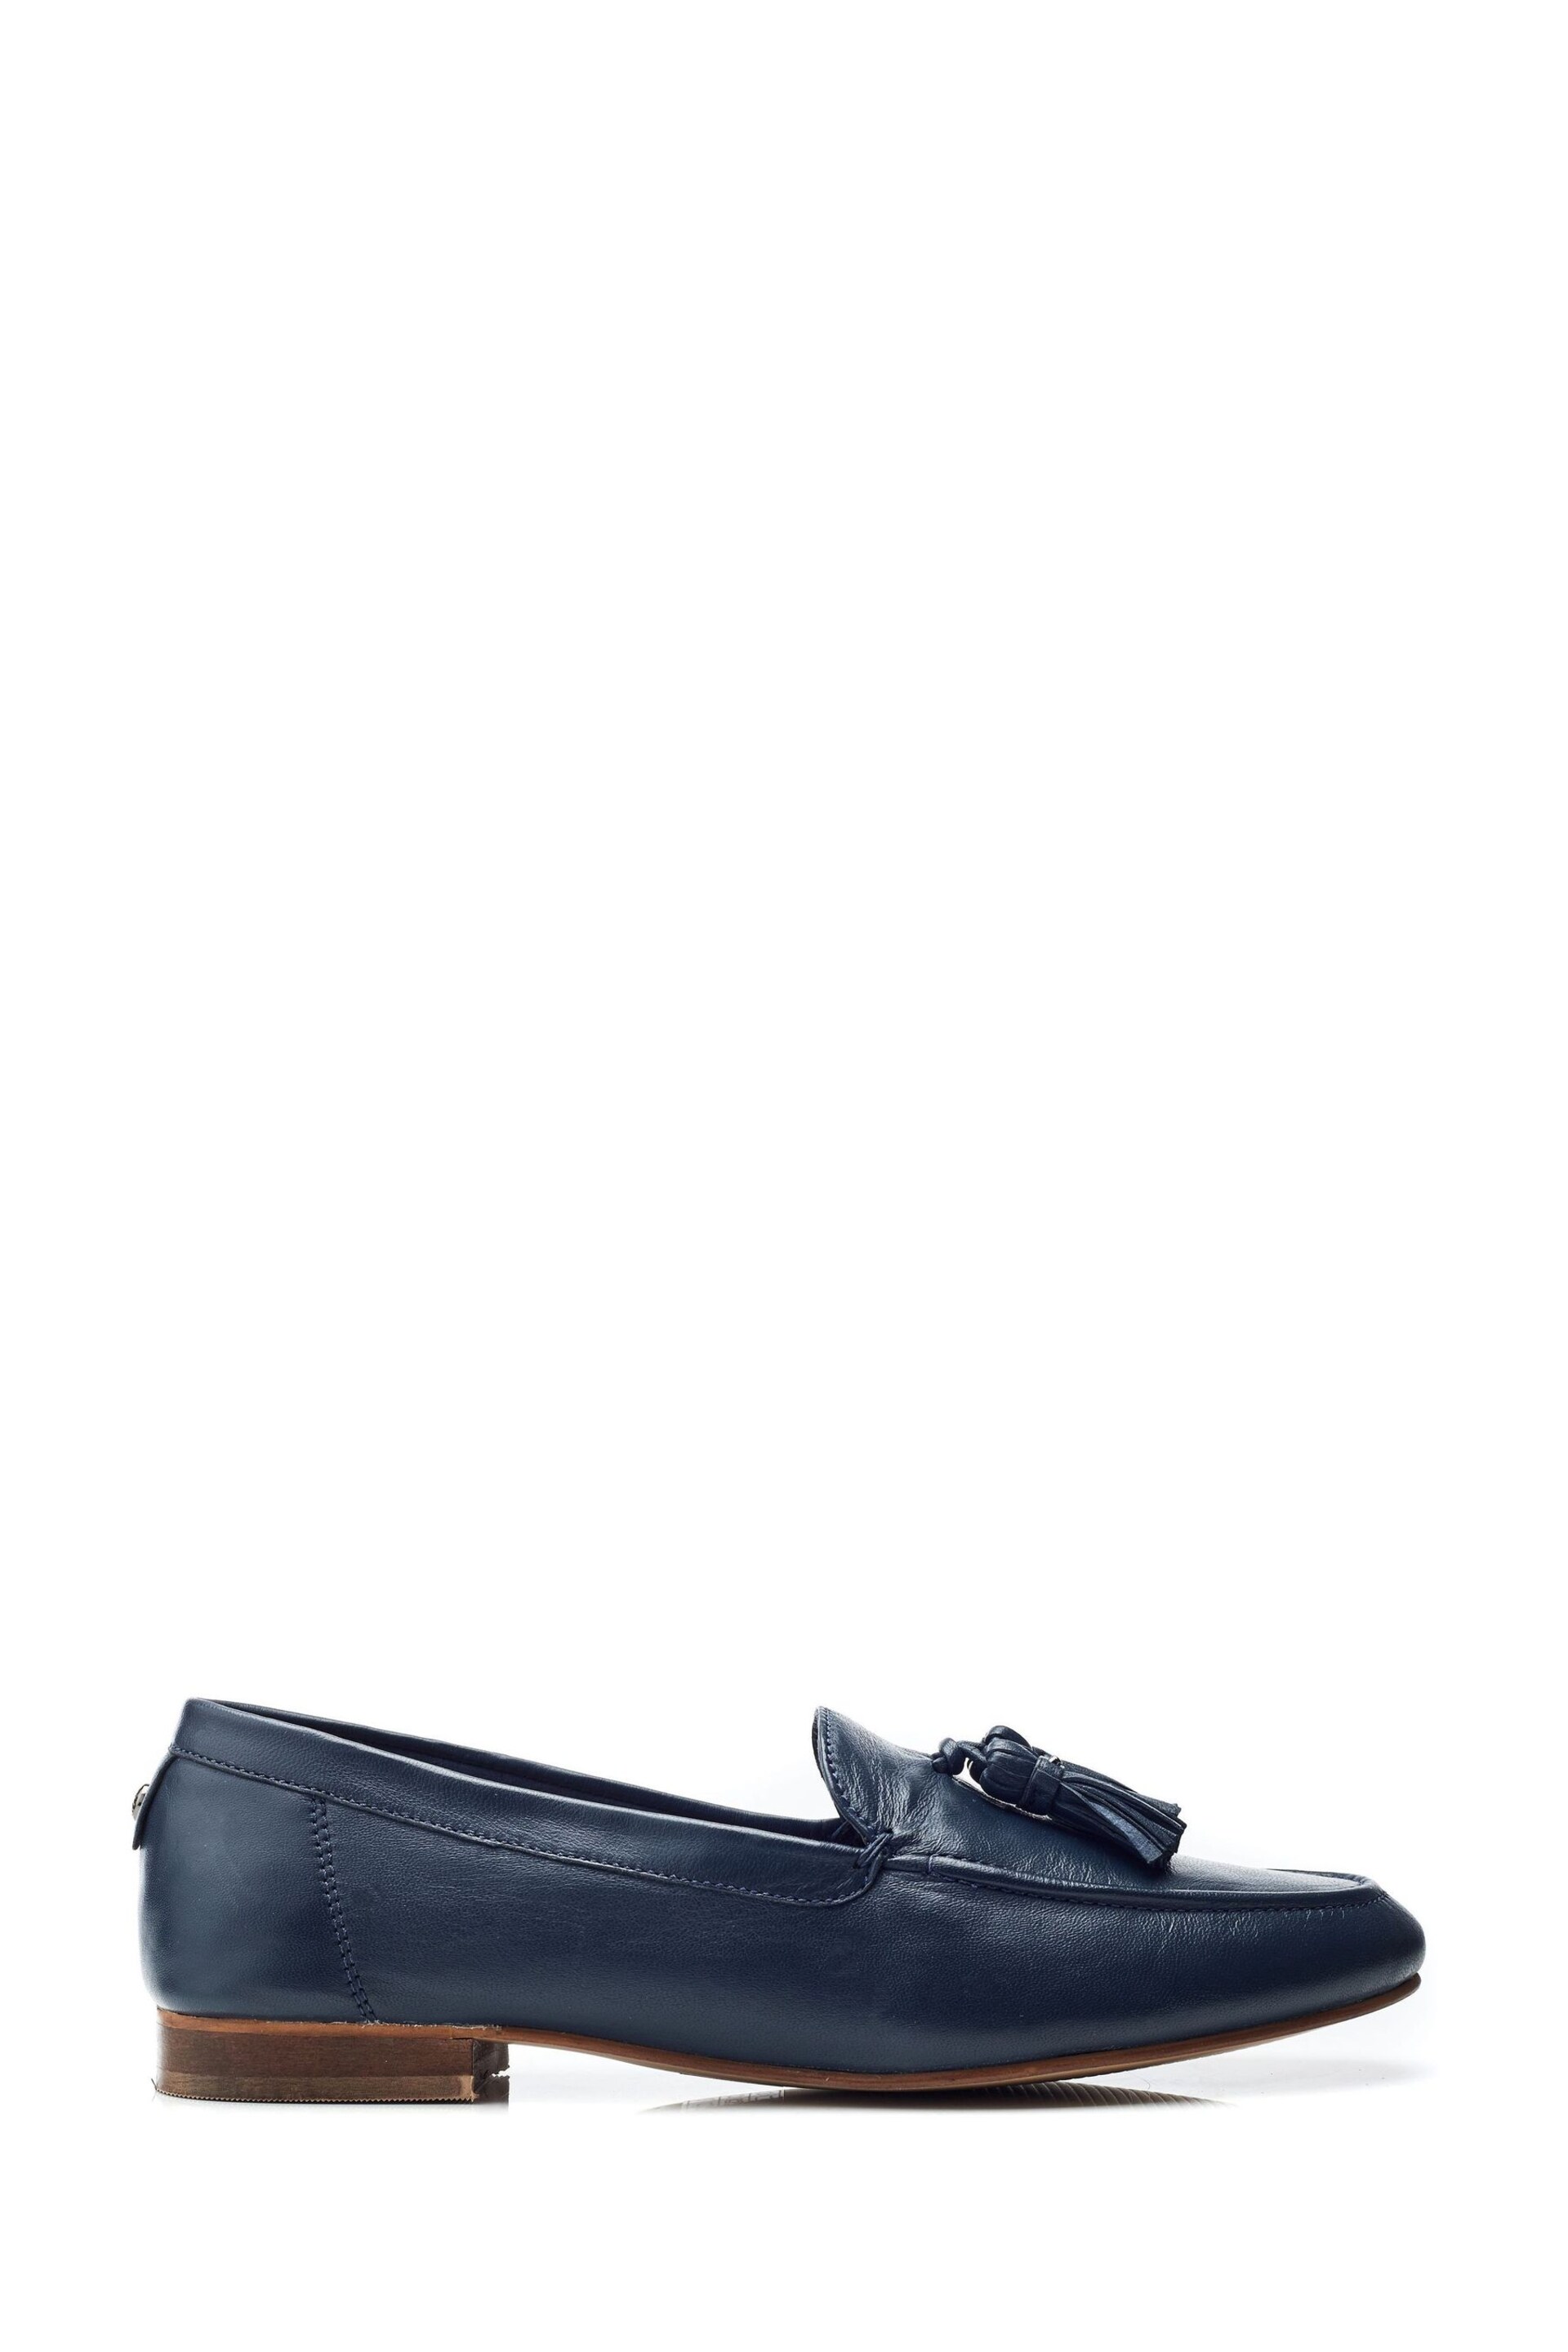 Moda in Pelle Blue Ellmia Clean Loafers With Tassle - Image 1 of 4